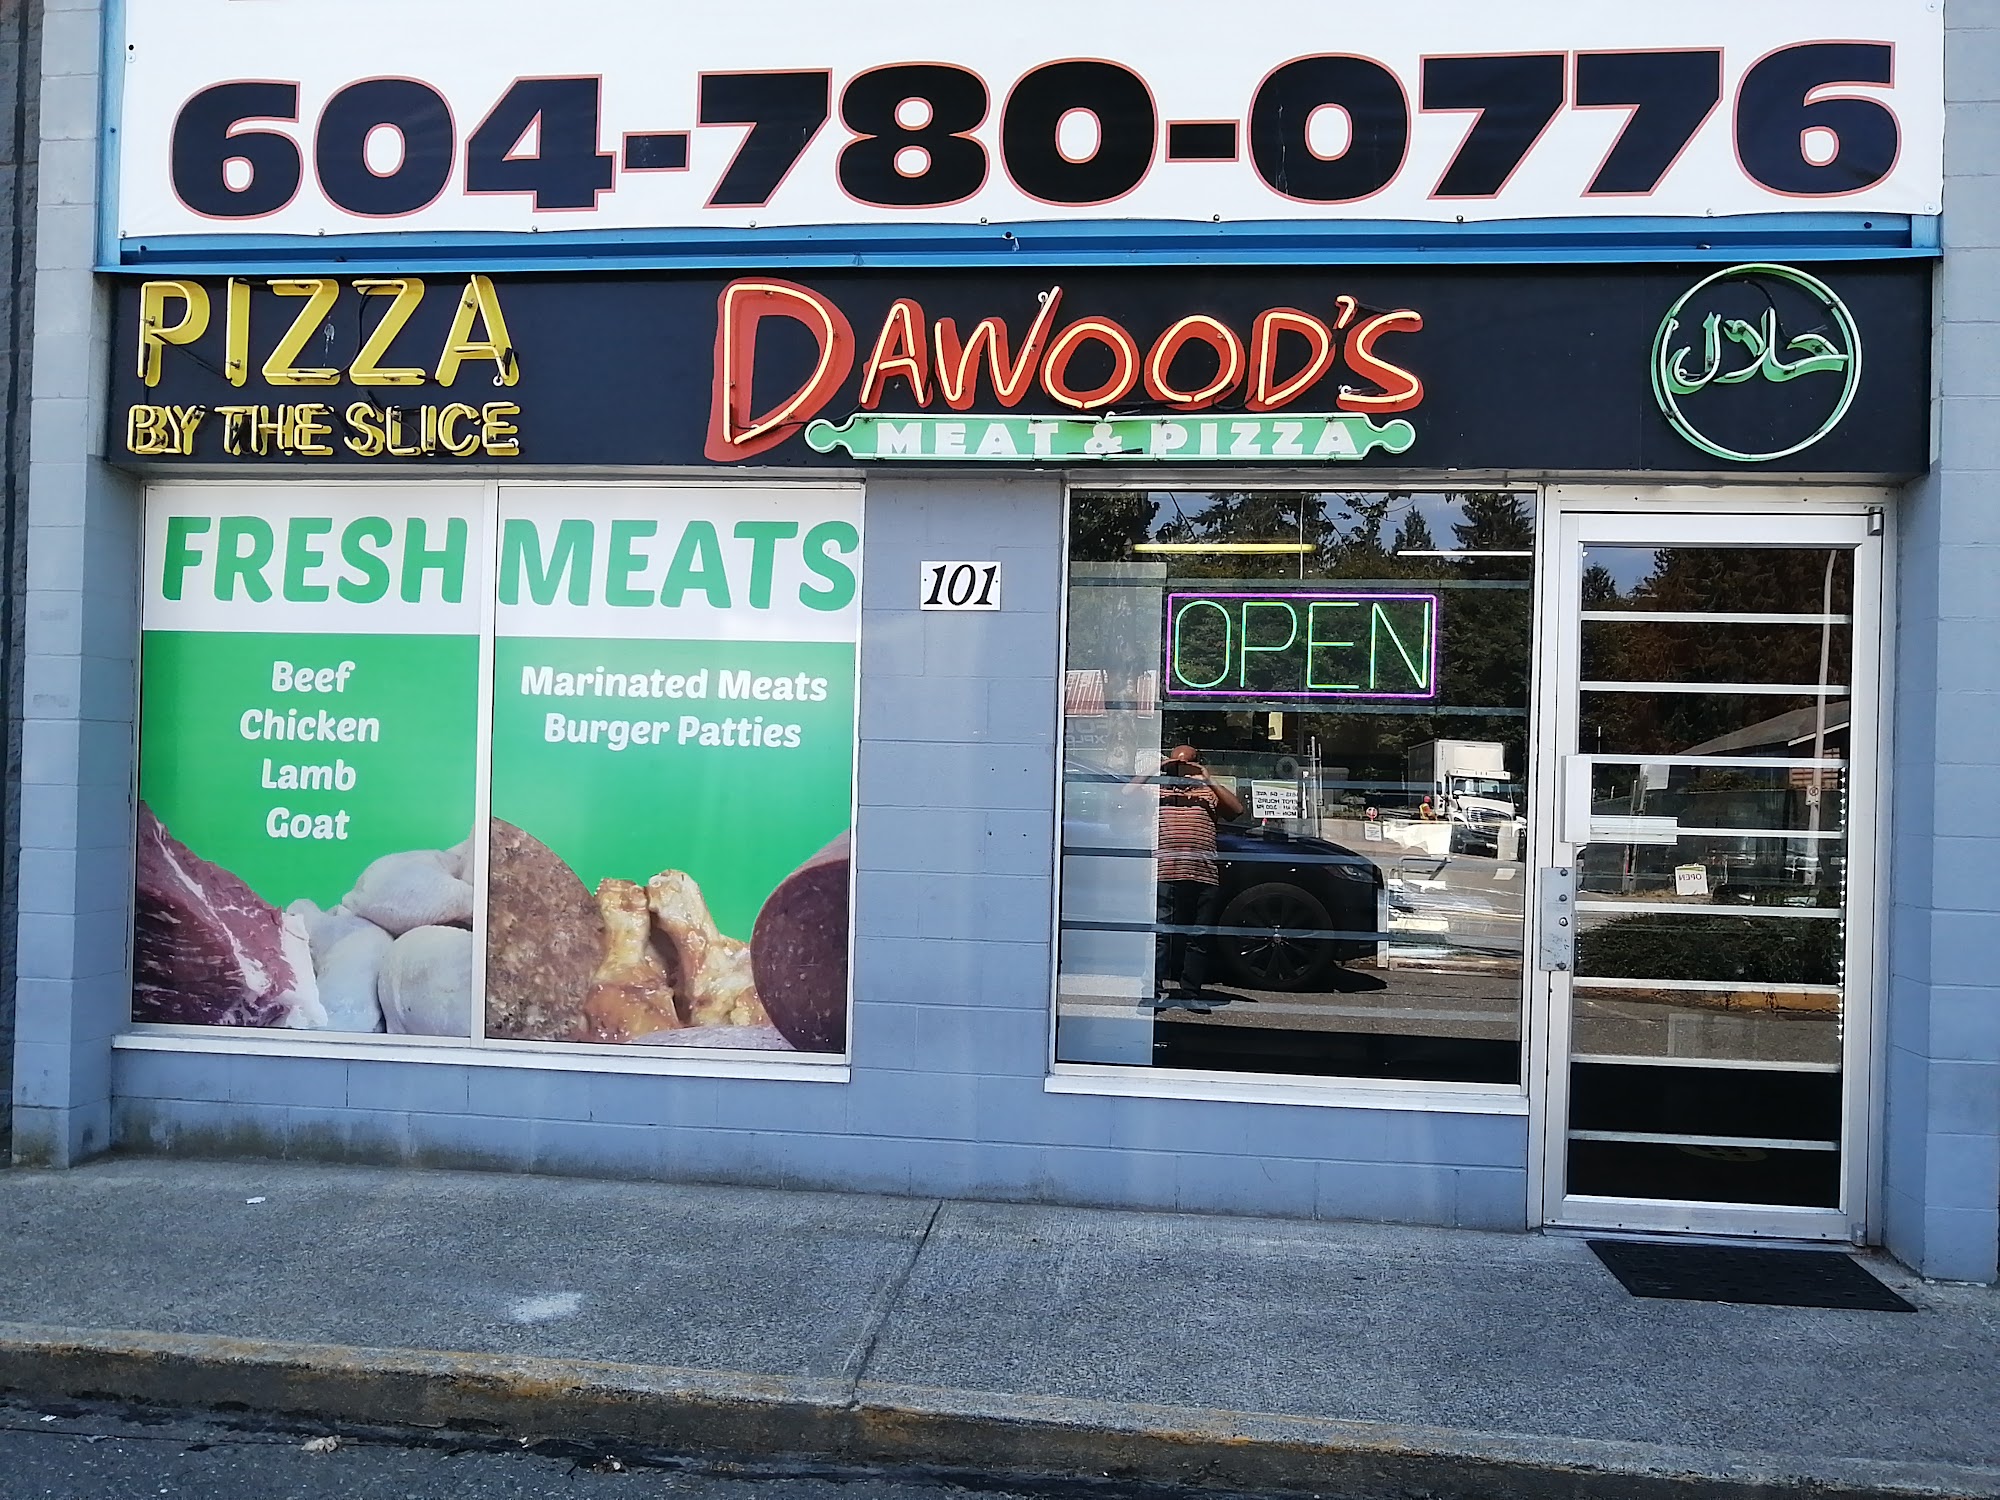 DAWOOD'S MEAT & PIZZA